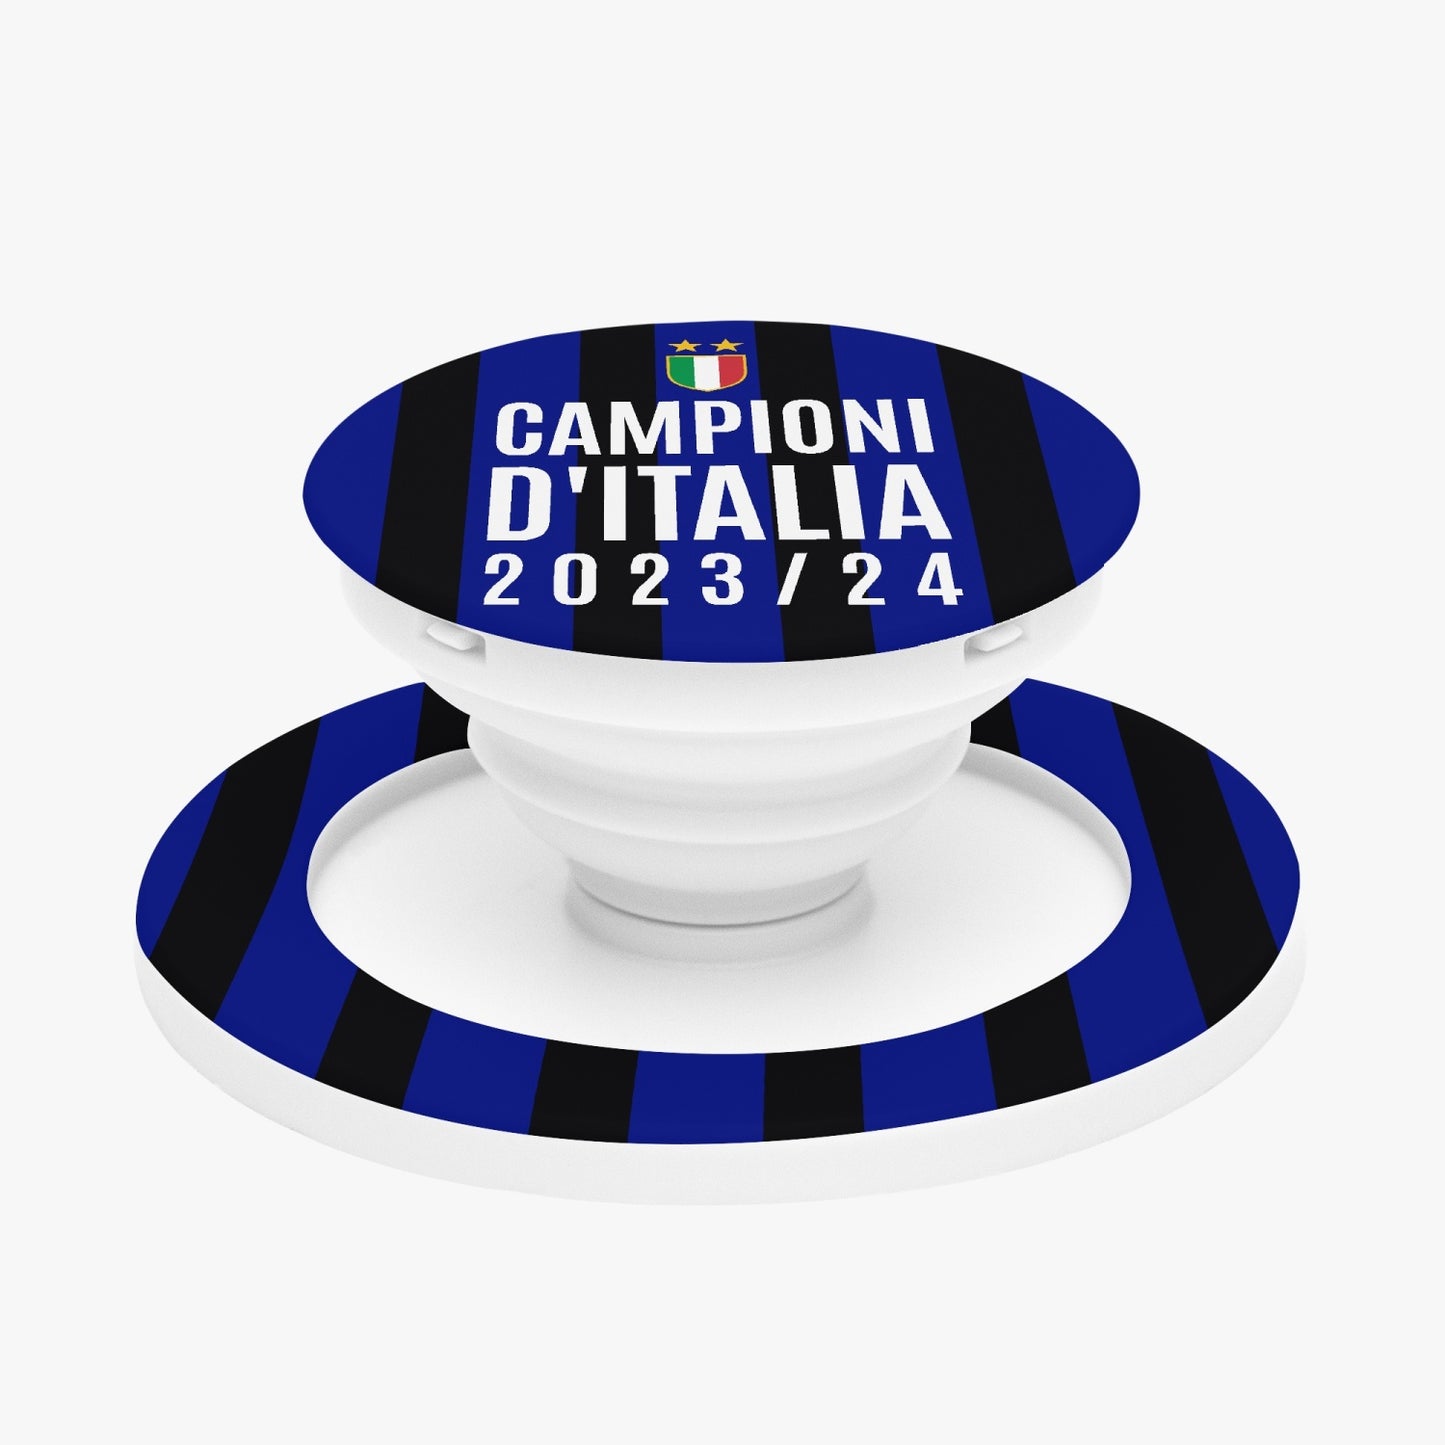 Inter Campioni d'Italia - Magnetic Collapsible Grip And Stand